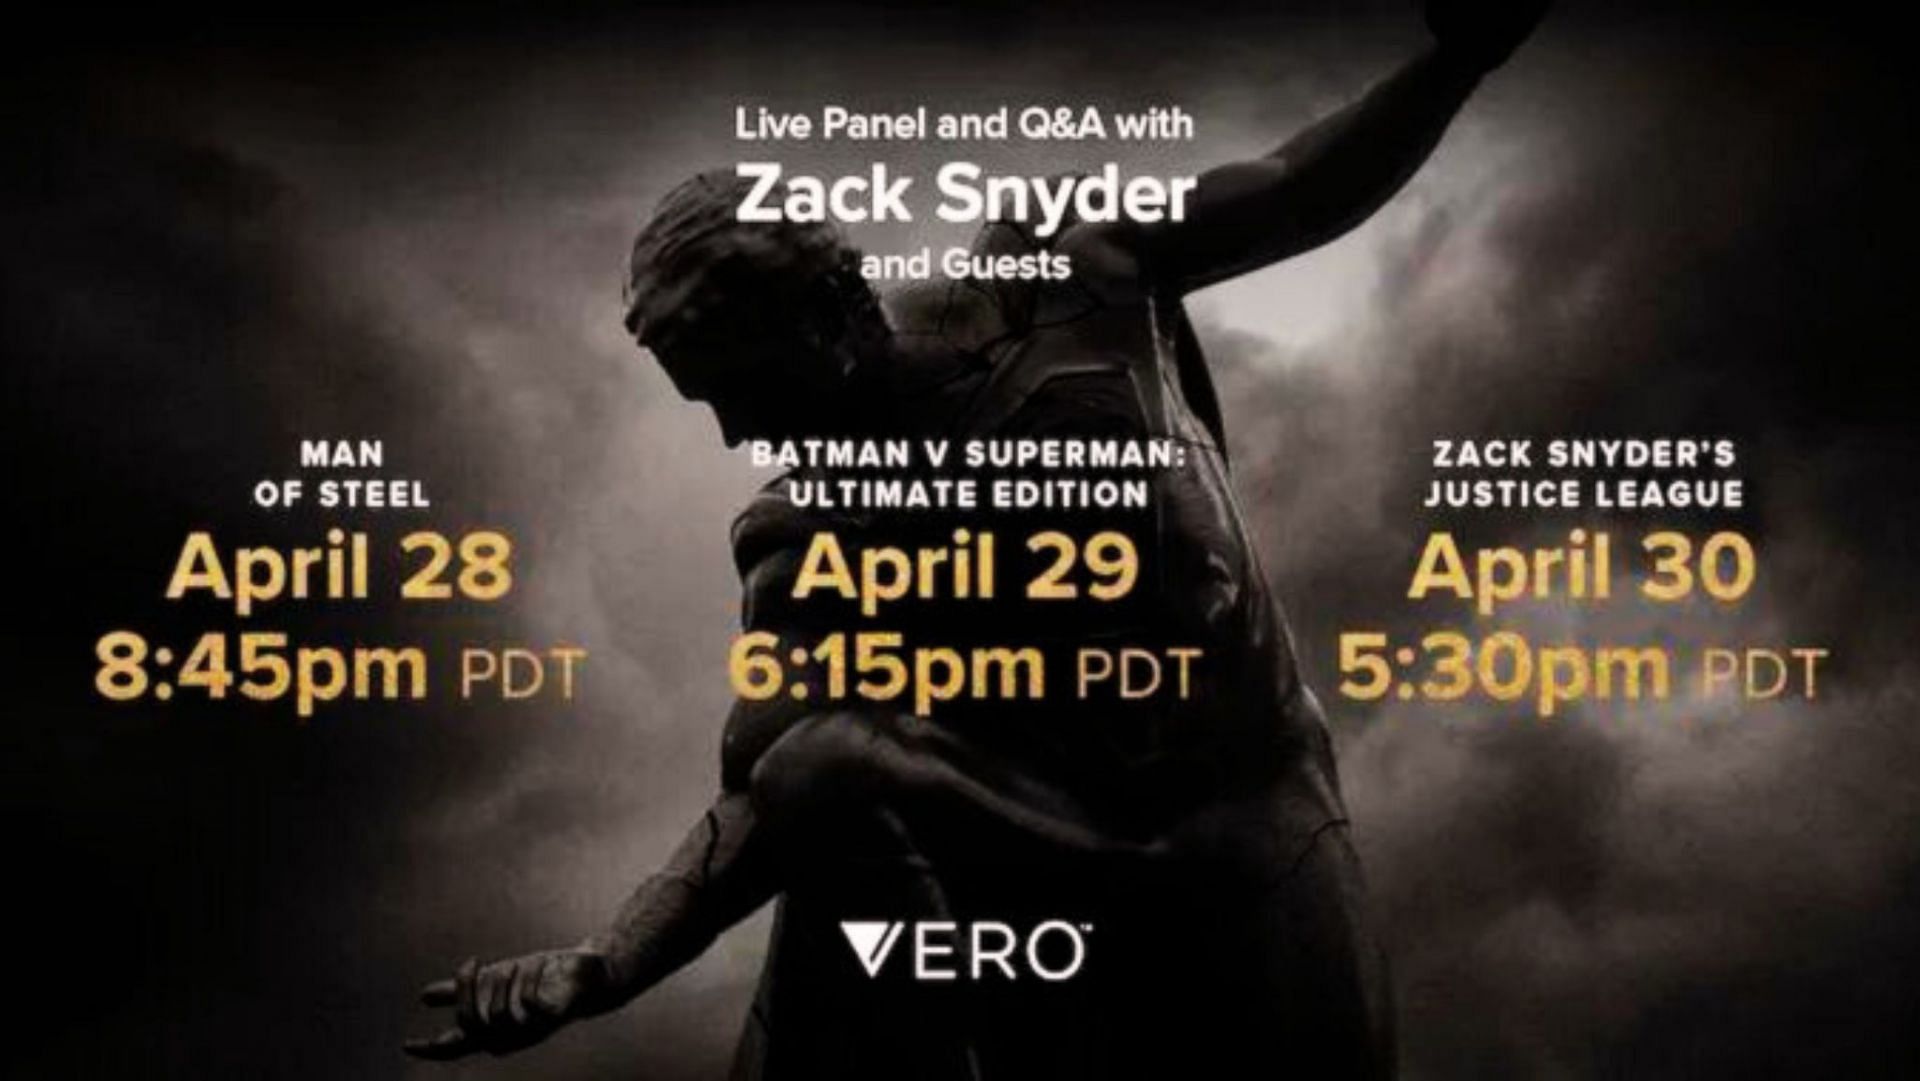 Join the celebration of Zack Snyder&#039;s DC films with live Q&amp;A panels and exclusive merch at the Full Circle event (Image via Zack Snyder&#039;s Vero)